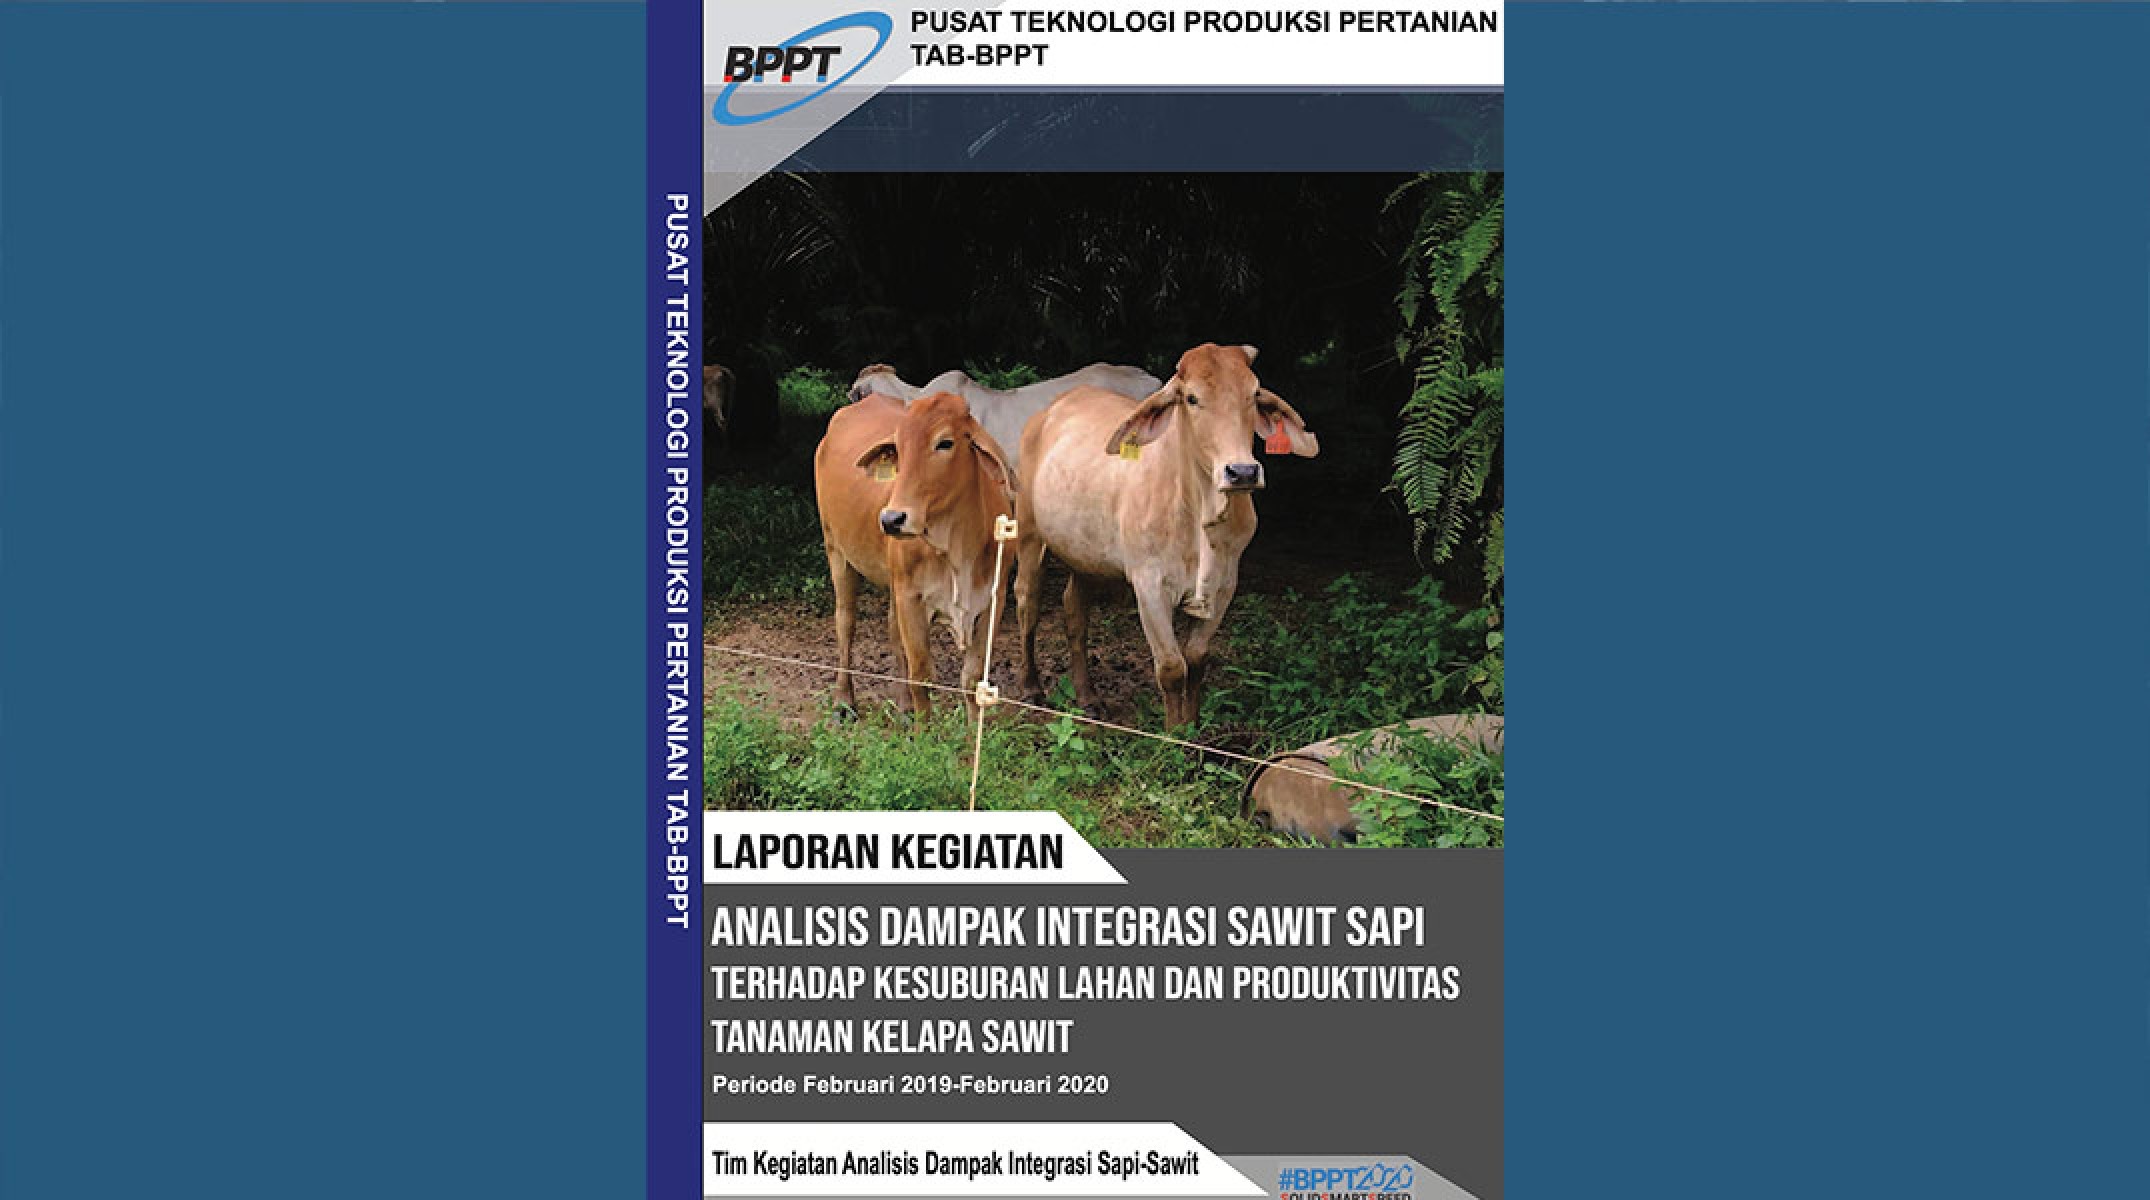 Impact Analysis of Land Fertility and Oil-palm Productivity on the Integrated System of Oil-Palm and Cattle Production - Agency for the Assessment and Application of Technology (BPPT)